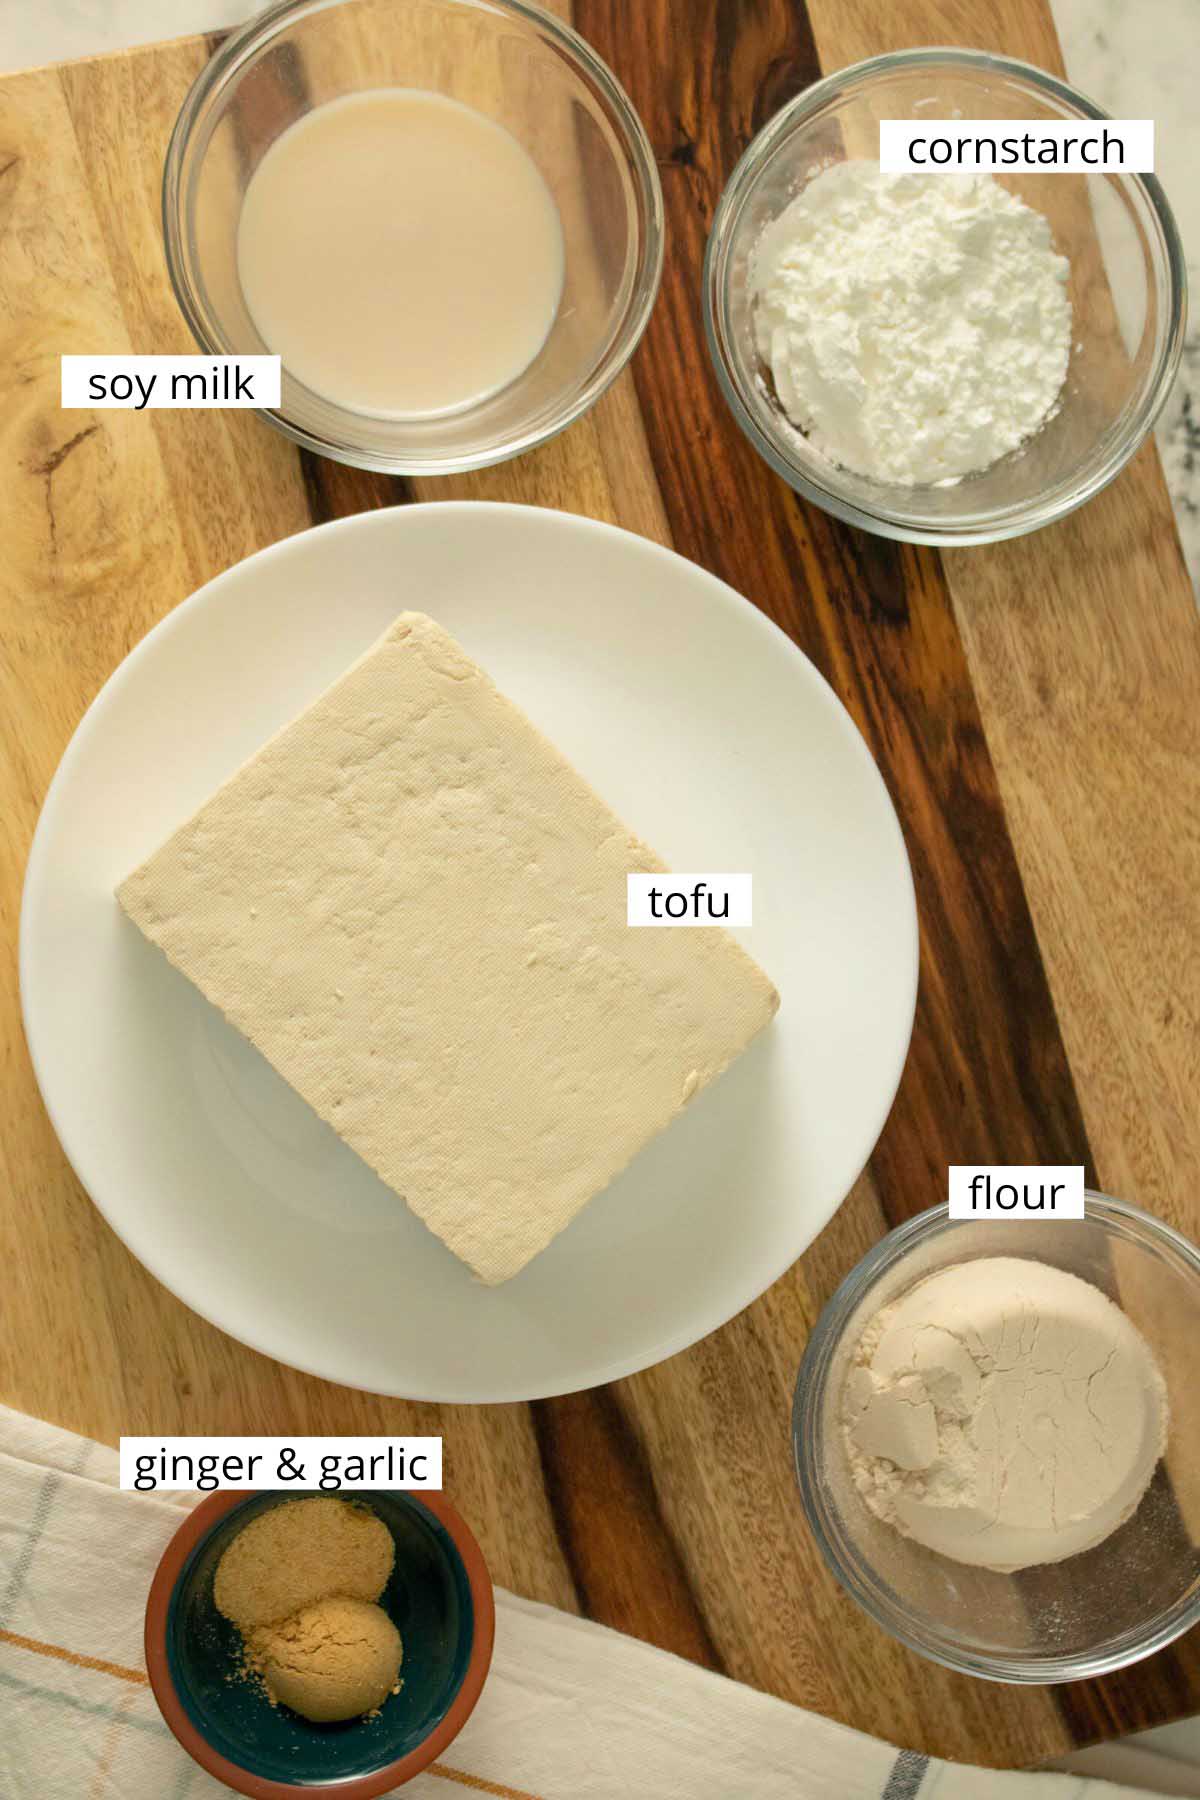 tofu, cornstarch, flour, soy milk, and spices arranged on a wooden cutting board with text labels